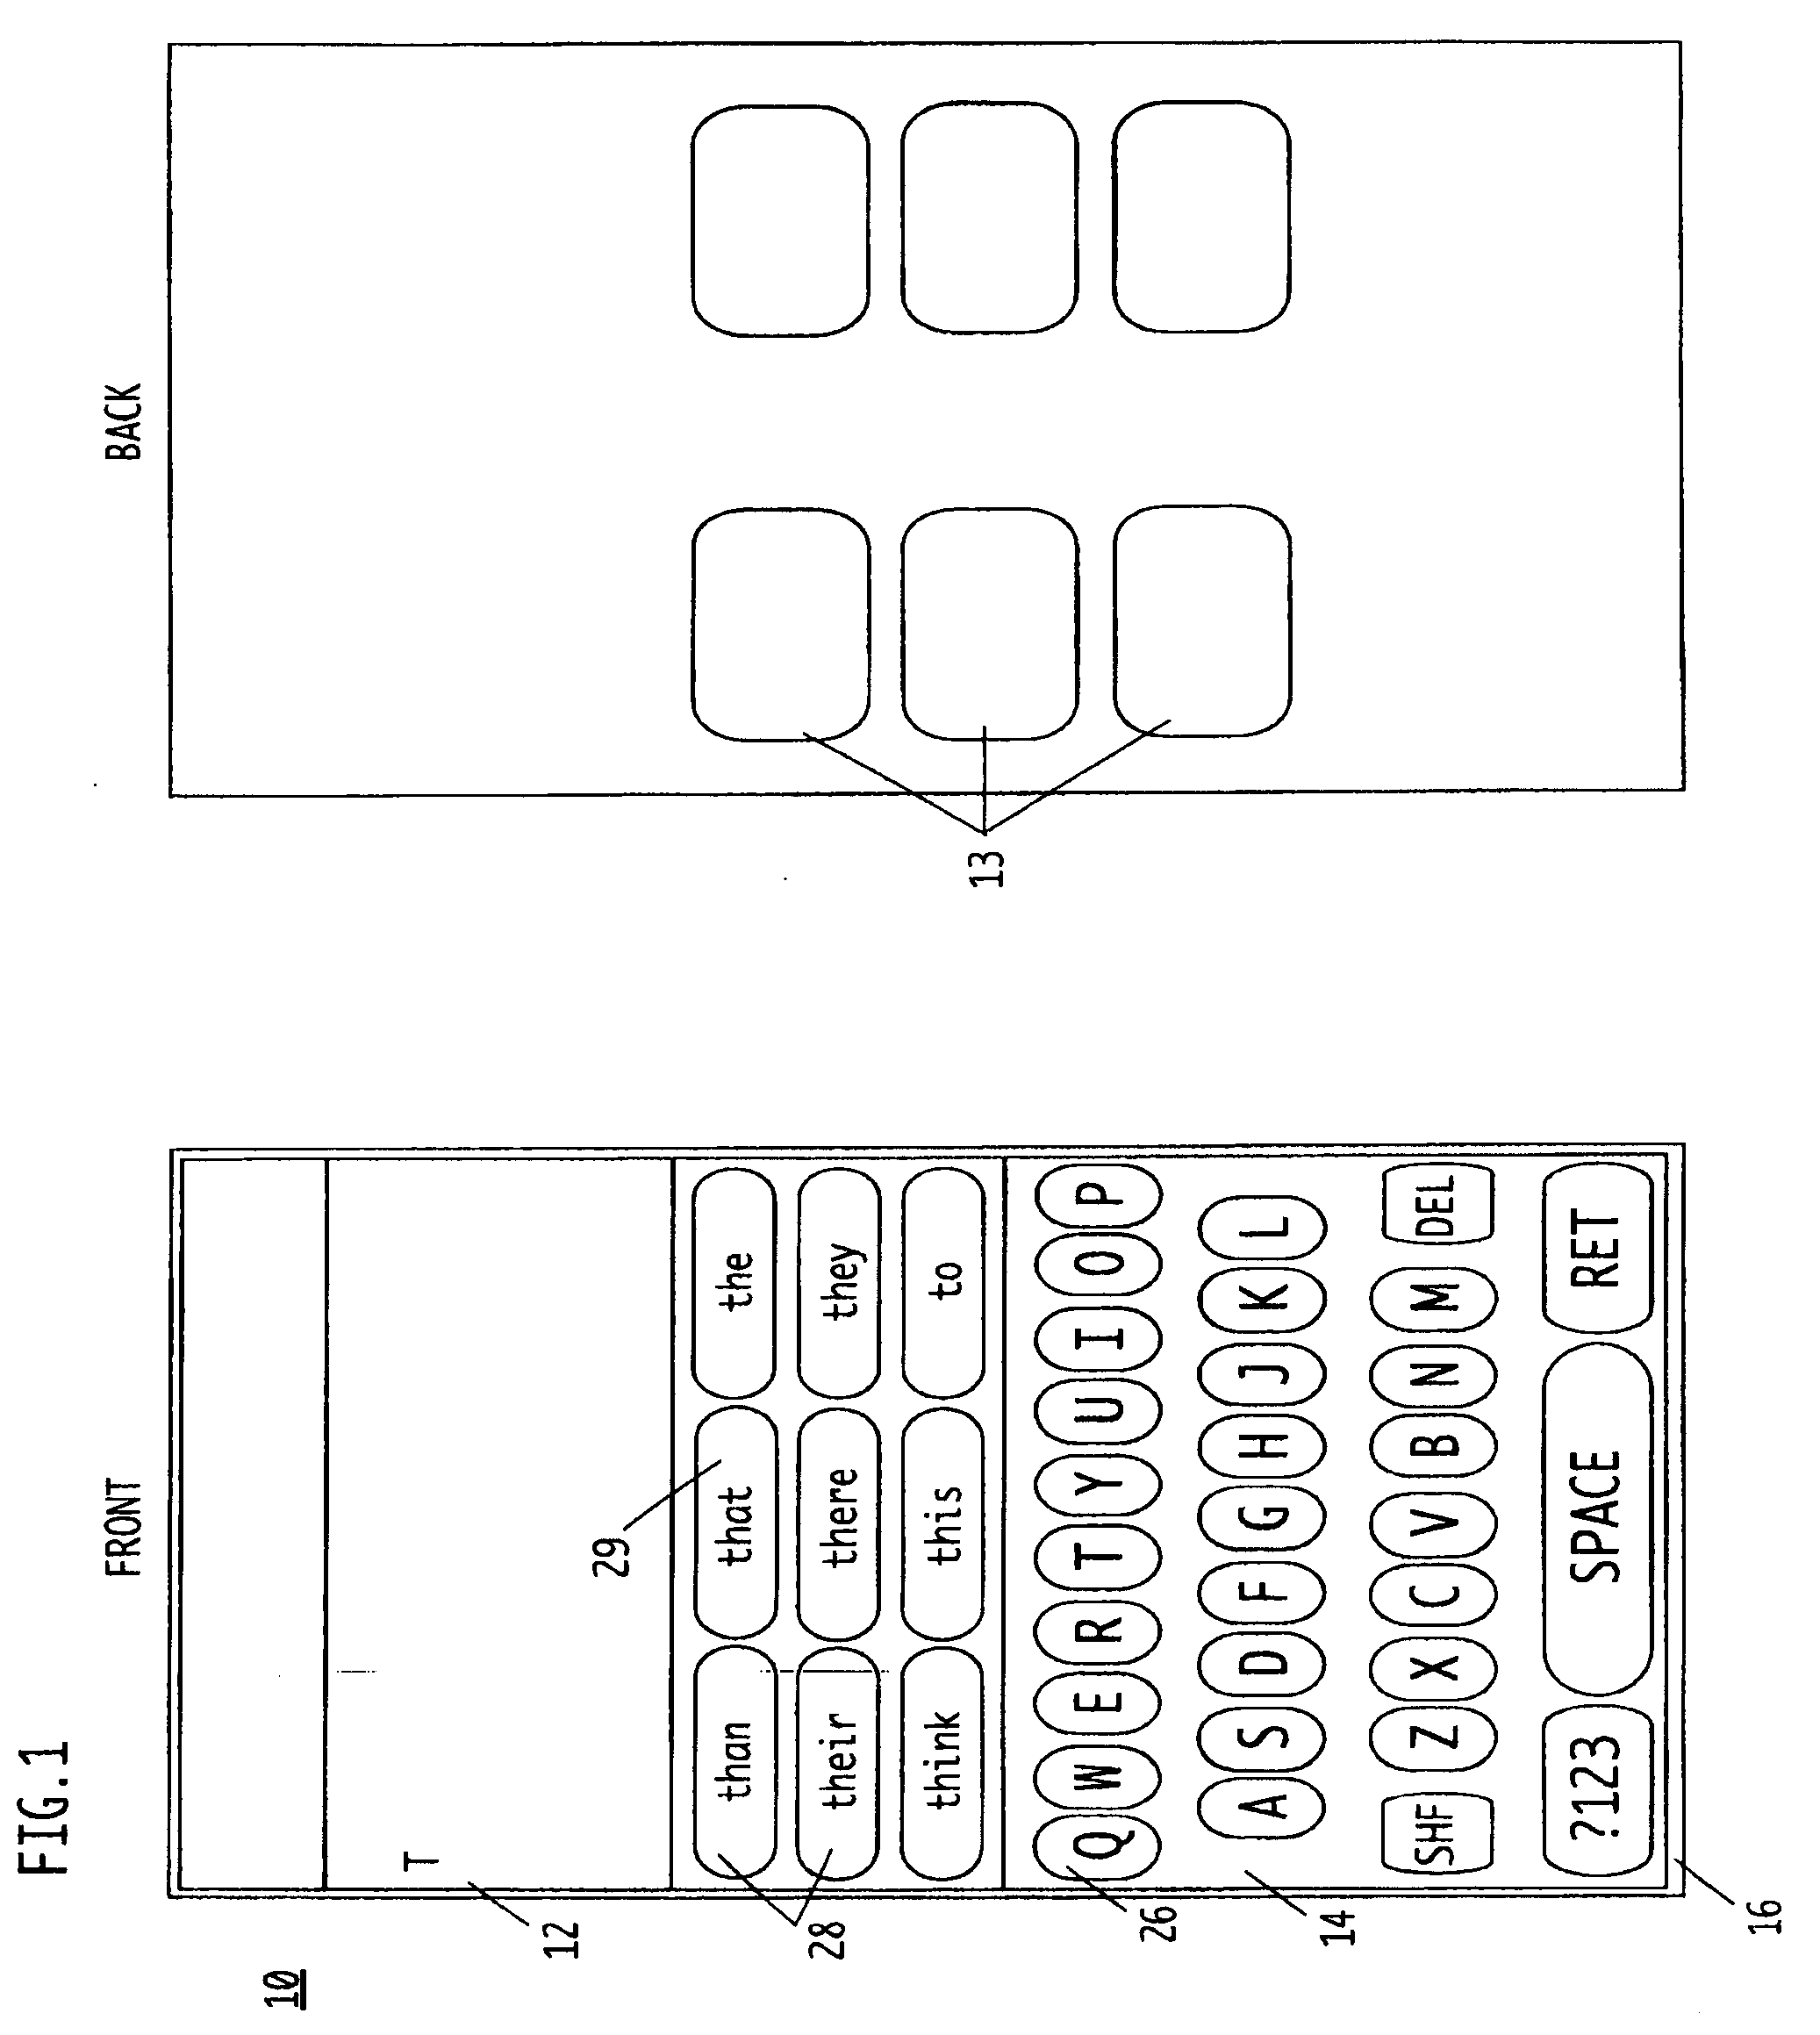 Methods and Systems for Improved Data Input, Compression, Recognition, Correction, and Translation through Frequency-Based Language Analysis